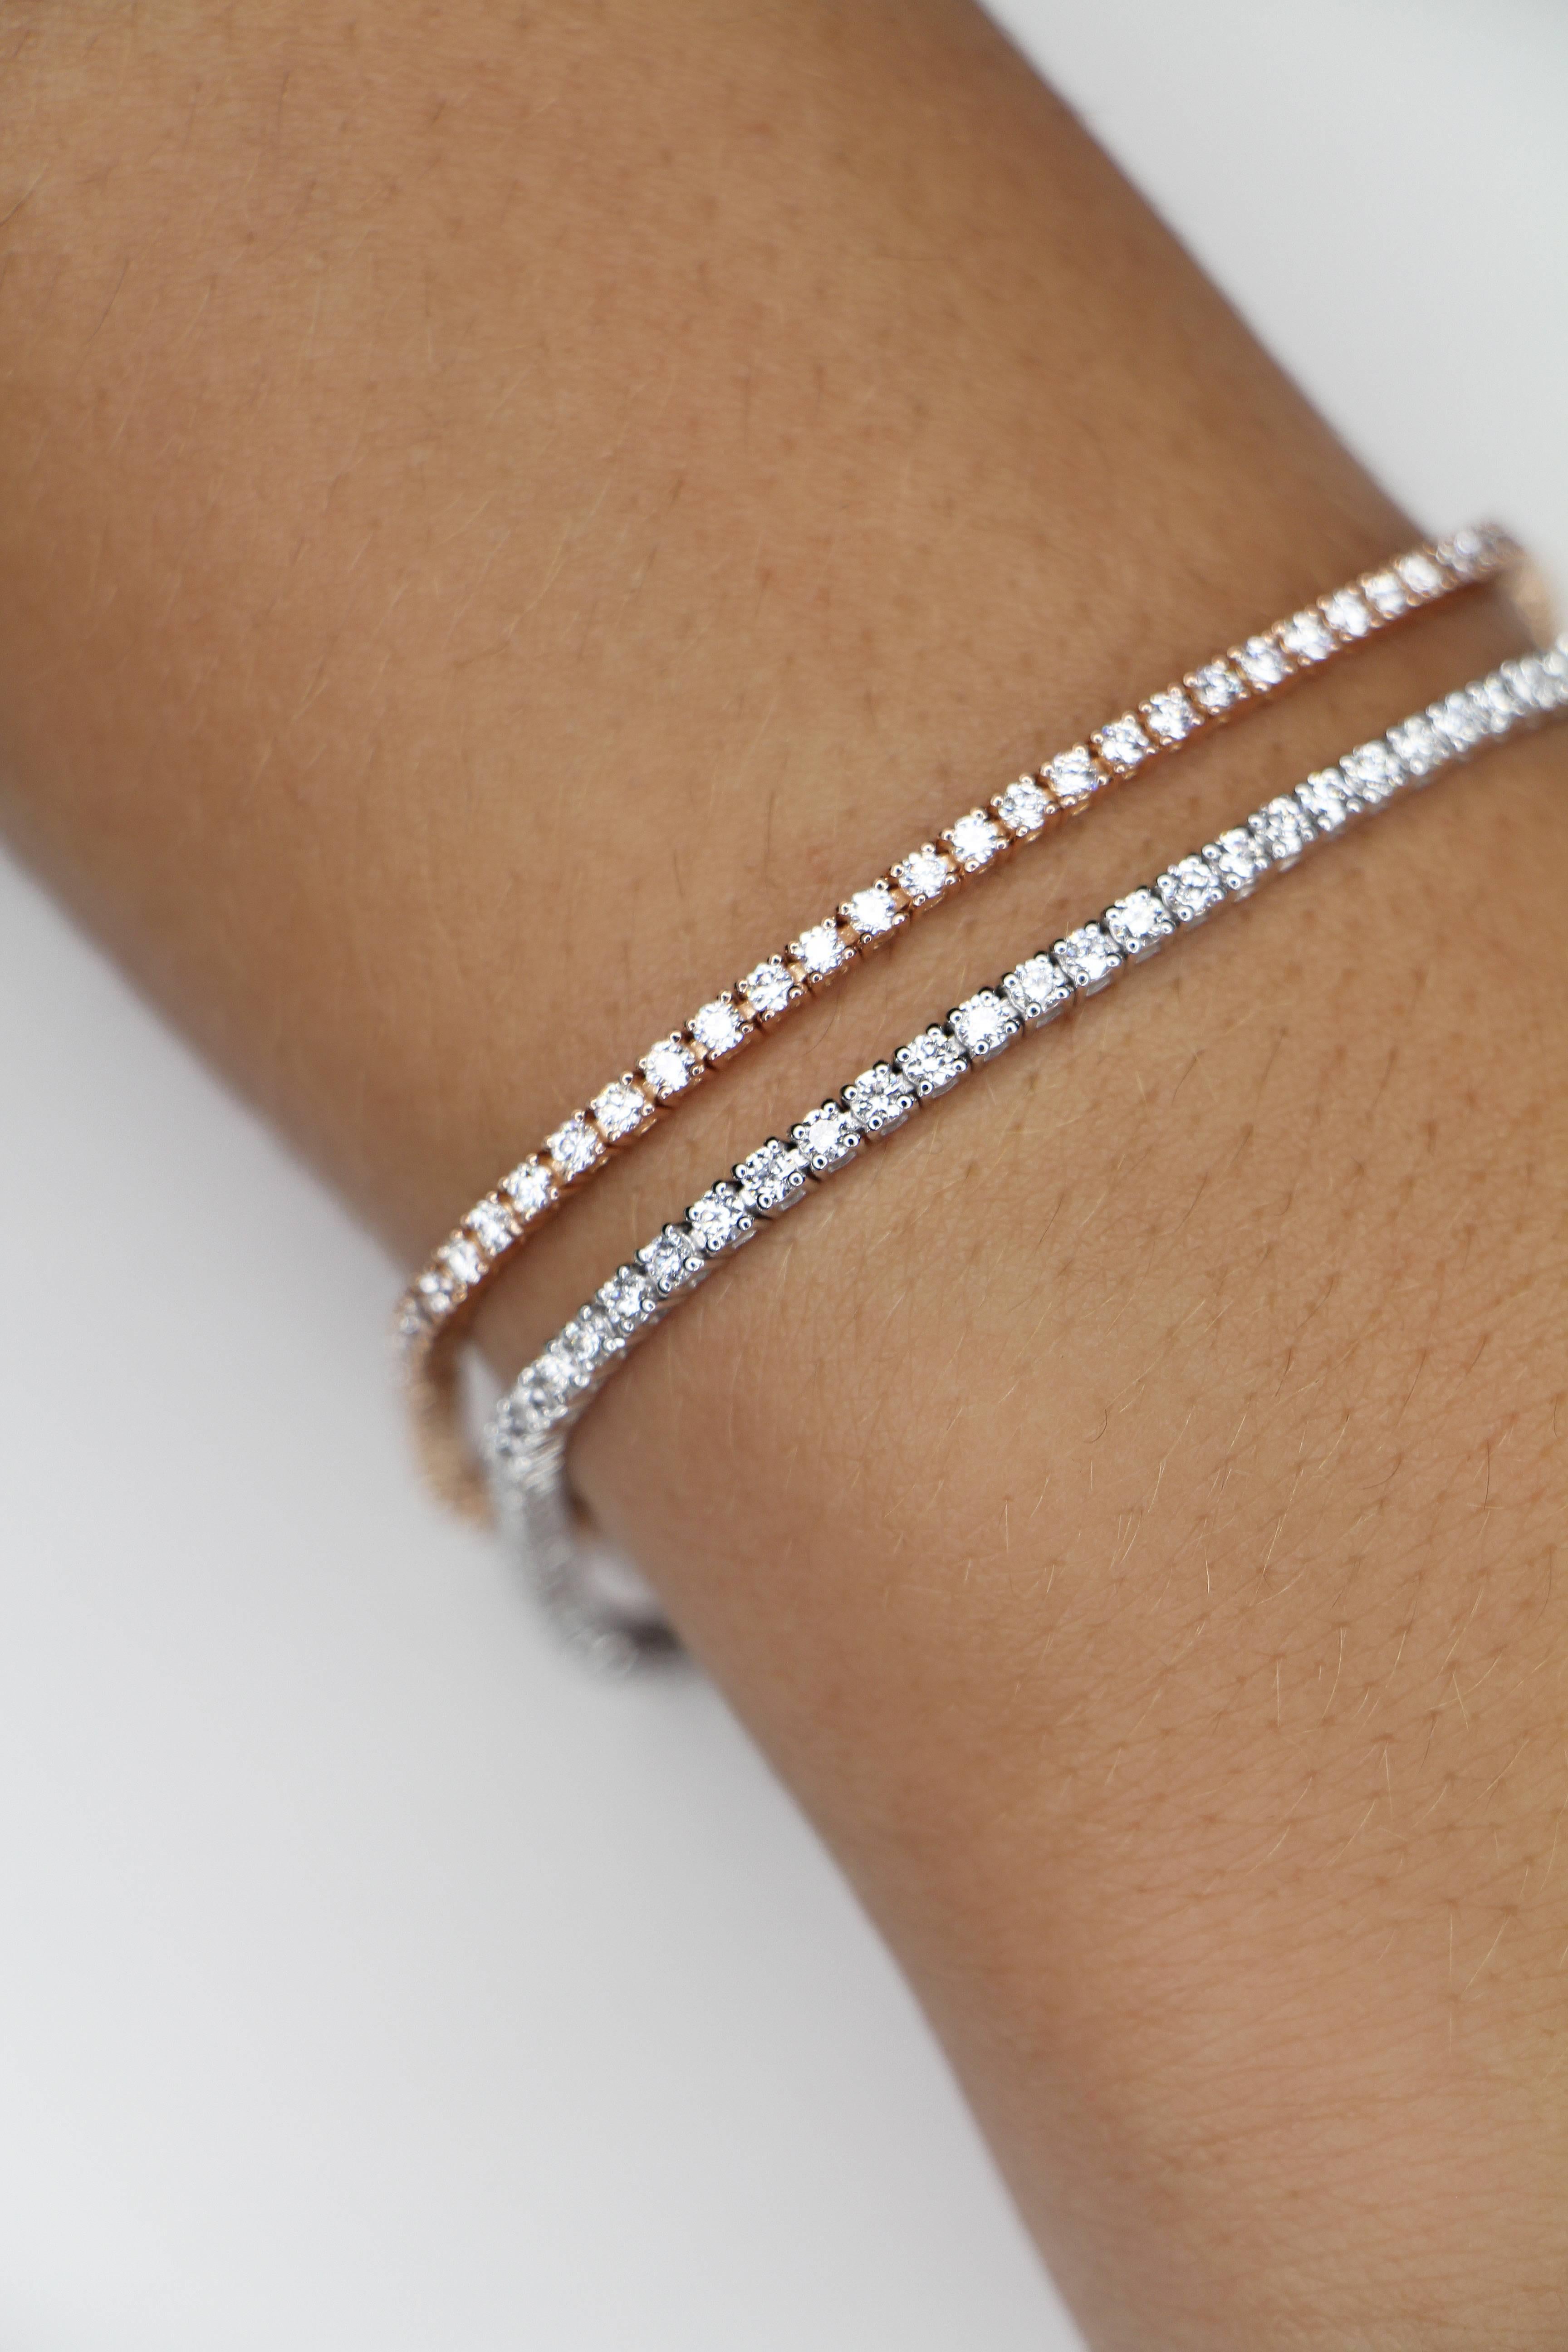 An amazing Diamond Tennis Bracelet is made with 80 Round-Cut Diamonds weighing 1,60 carats.
The Diamonds are GVS qualities.
The Lenght of the bracelet is 18 cm (7 In).
The Bracelet is 18K White Gold.
Also available in 18K Rose Gold and 18K Yellow